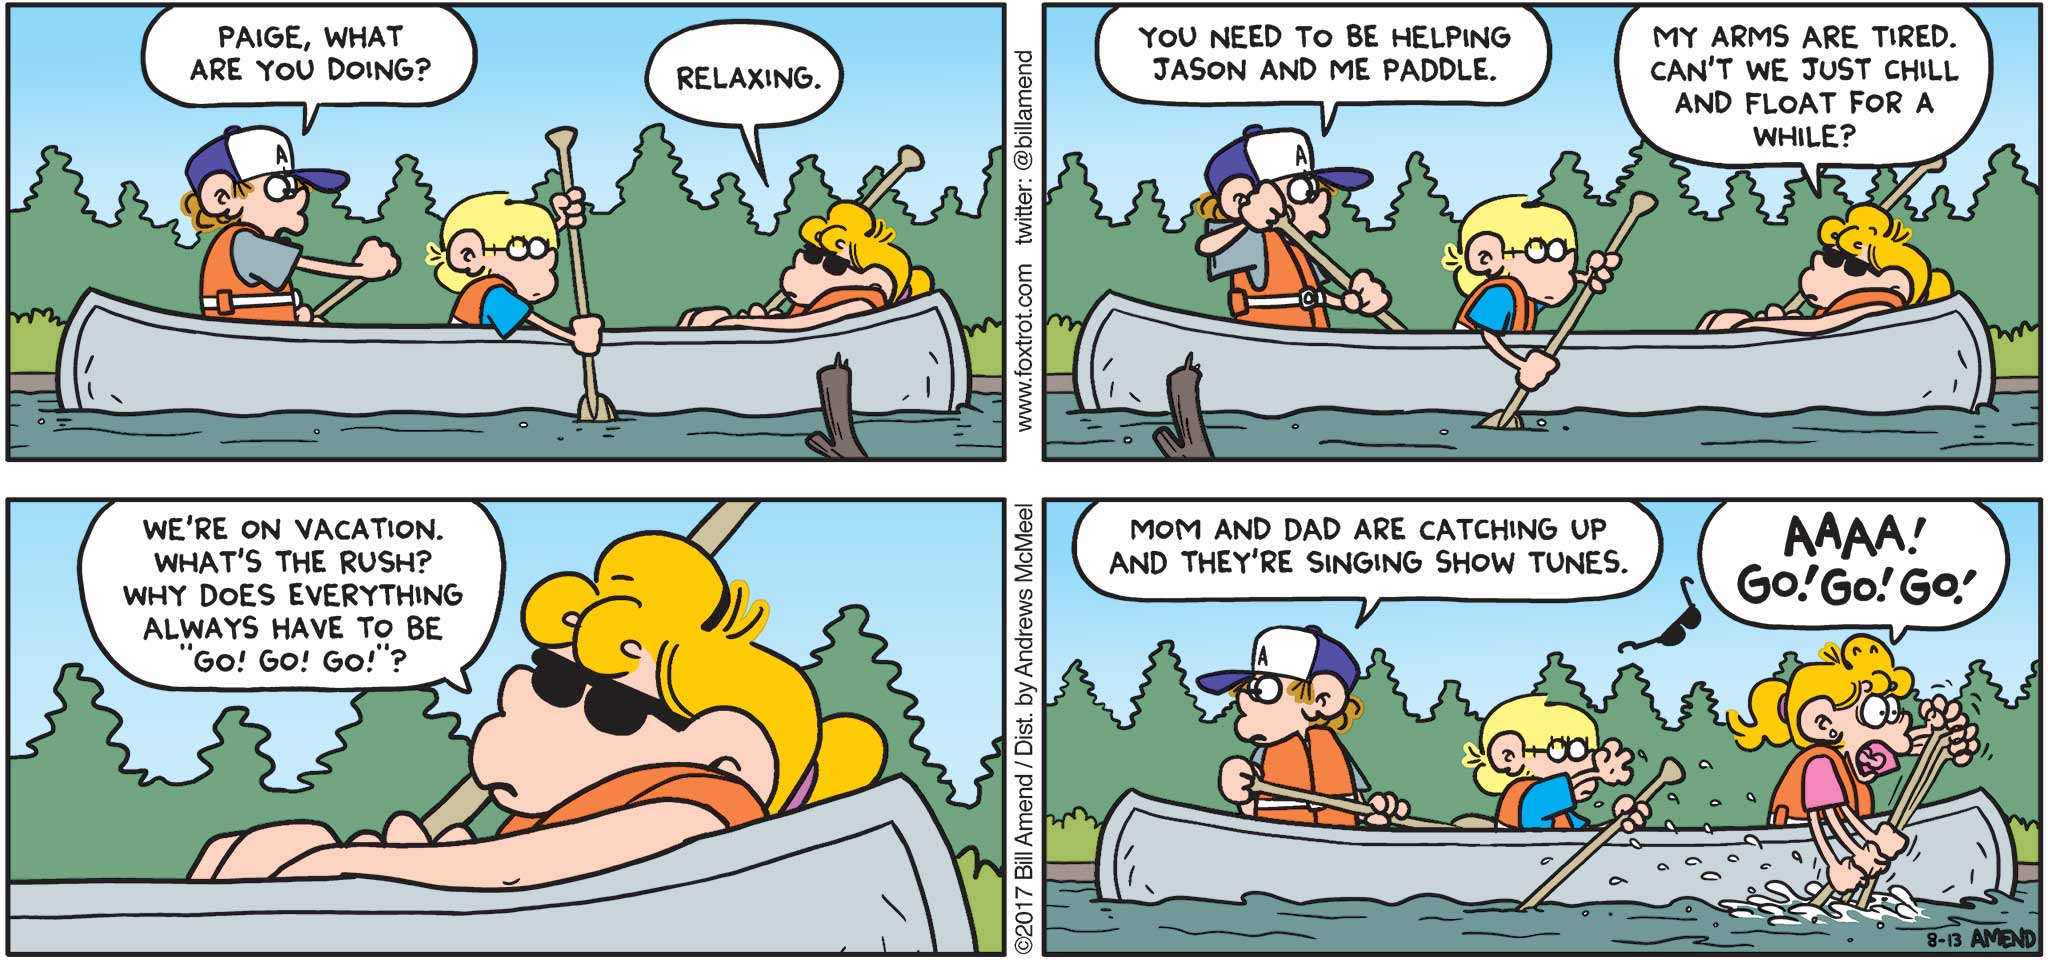 FoxTrot by Bill Amend - "Go Go Go" published August 13, 2017 - Peter says: Paige, what are you doing? Paige says: Relaxing. Peter says: You need to be helping Jason and me paddle. Paige says: My arms are tired. Can't we just chill and float for a while? We're on vacation. What's the rush? Why does everything always have to be "Go! Go! Go!"? Peter says: Mom and dad are catching up and they're singing show tunes. Paige says: AAAA! GO! GO! GO!